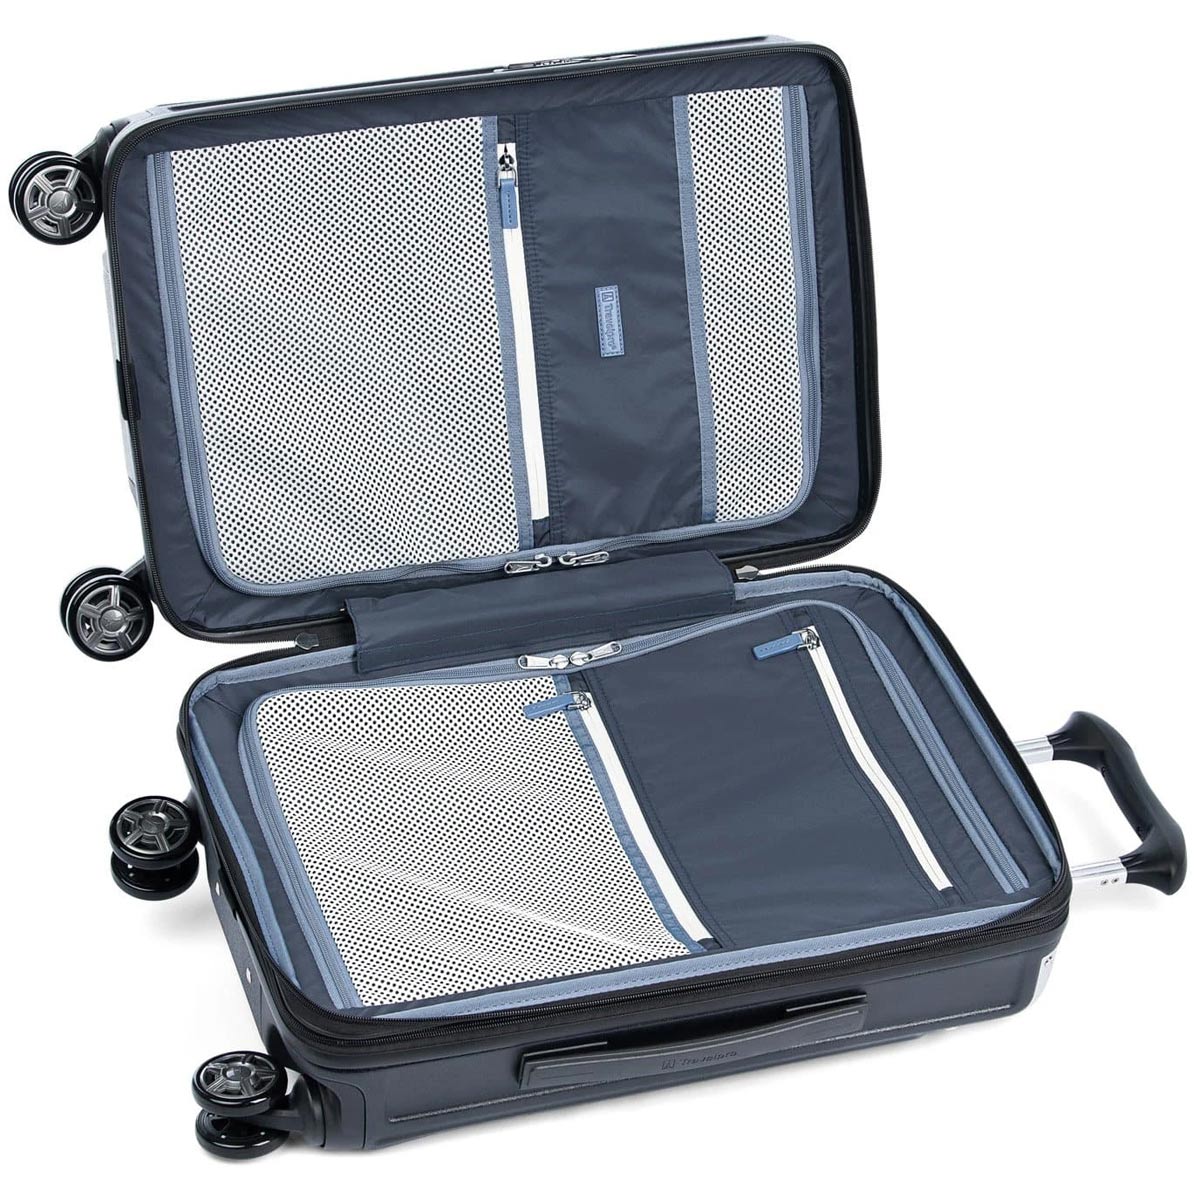 TRAVELPRO Pilot Air™ Elite 21 Expandable Carry-on Spinner Luggage